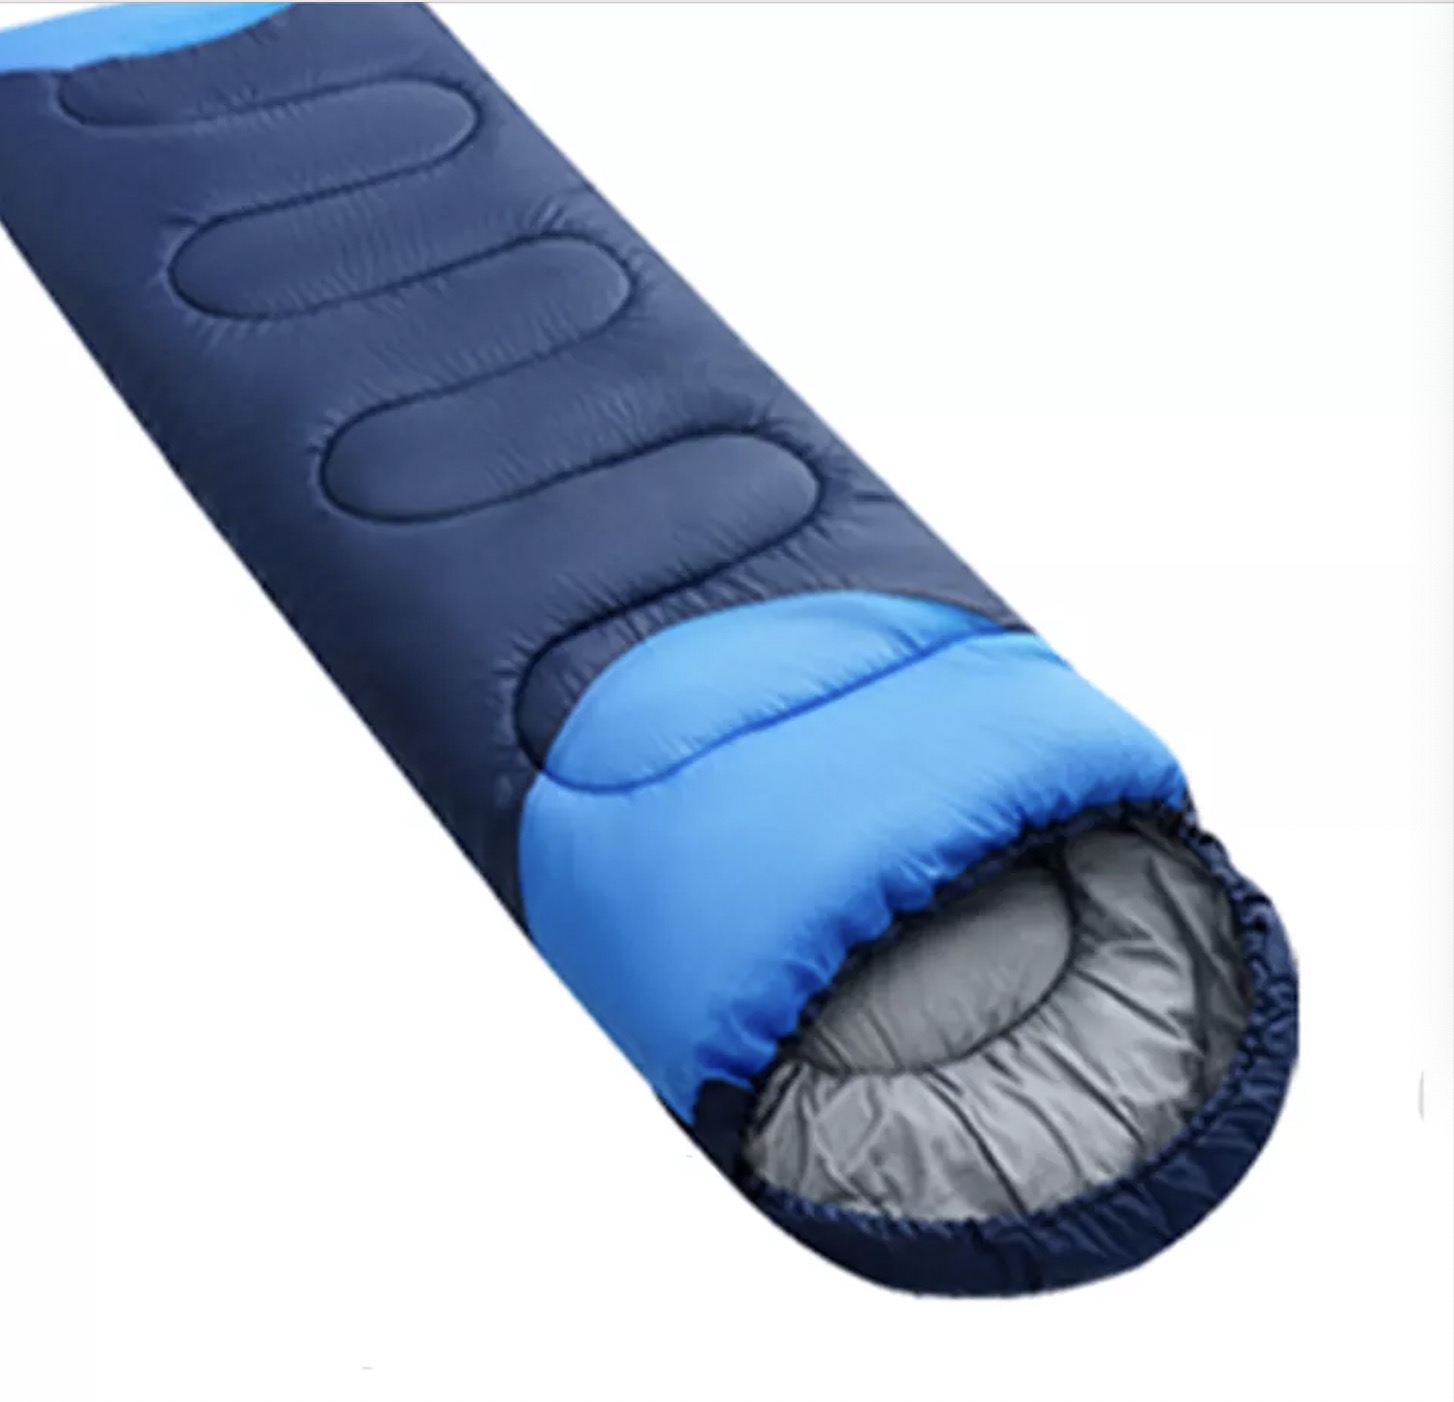 2022 Amazon Hot Sale Outdoor Skin Friendly Cotton Material Cold Proof Lightweight Sleeping Bag Great For Hiking Camping